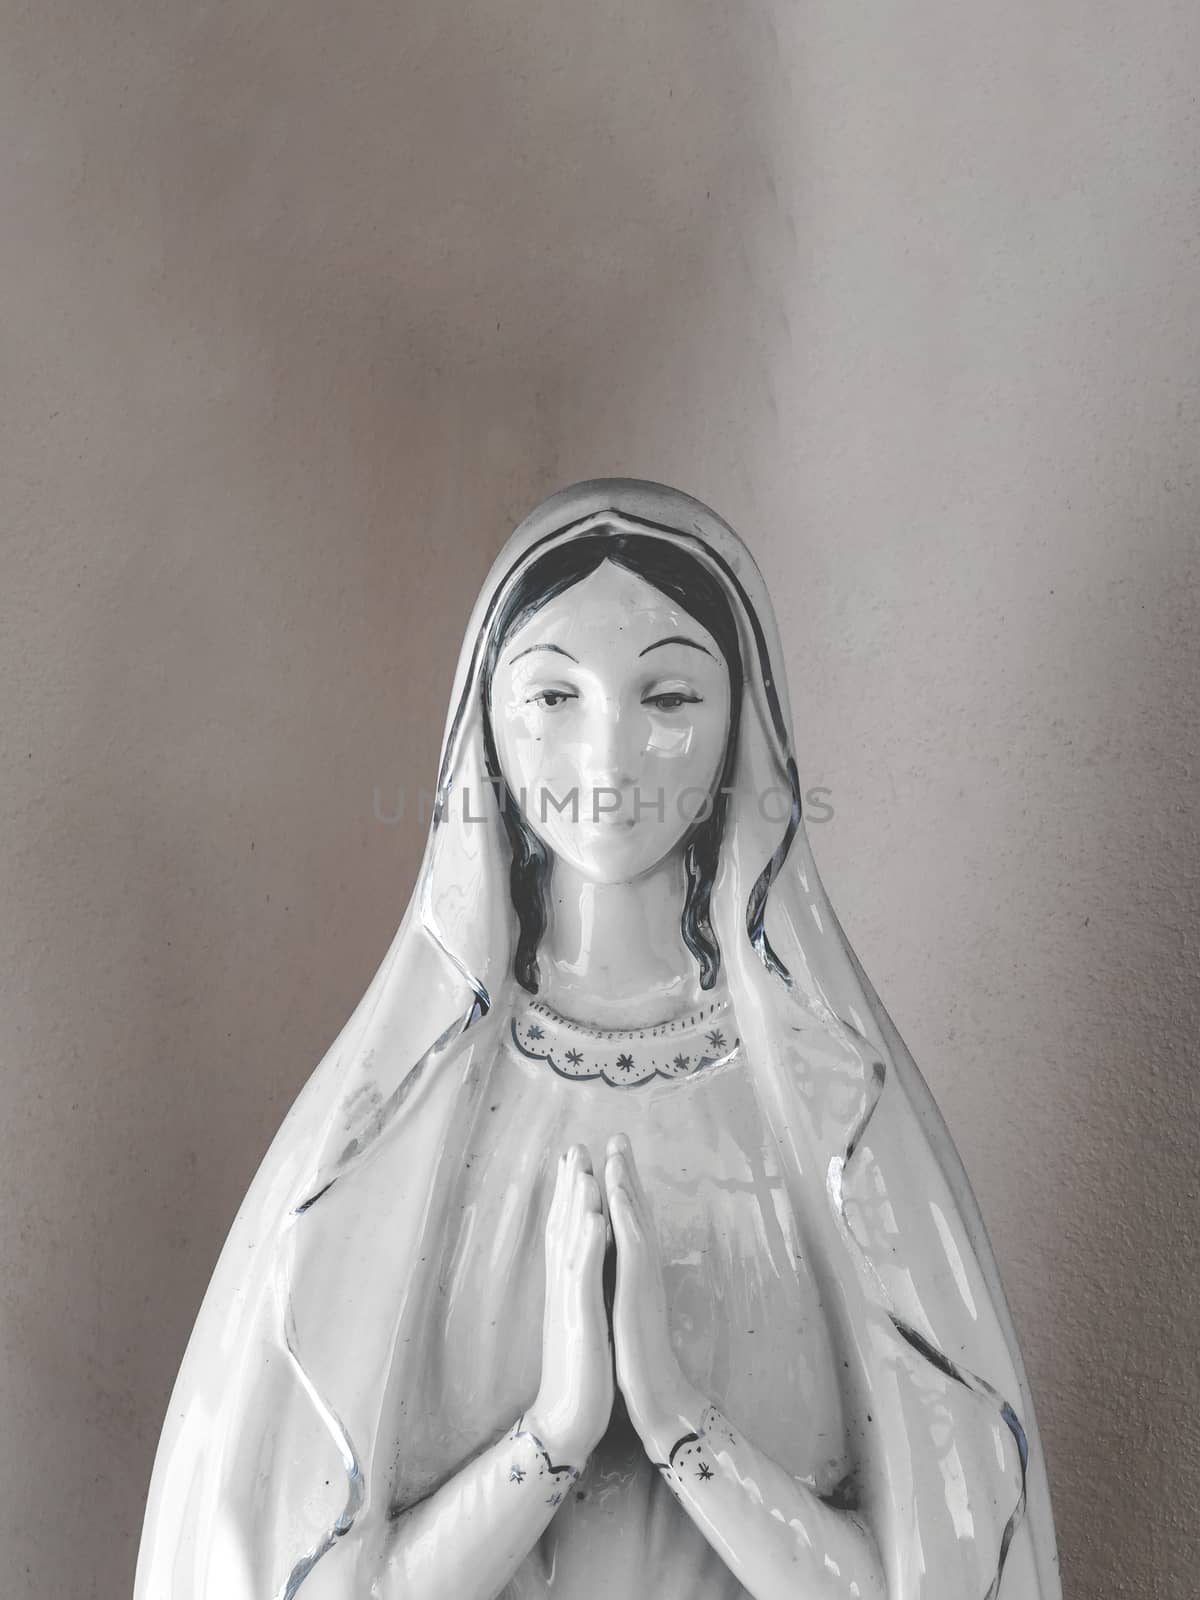 Virgin Mary porcelain statue in a vintage background